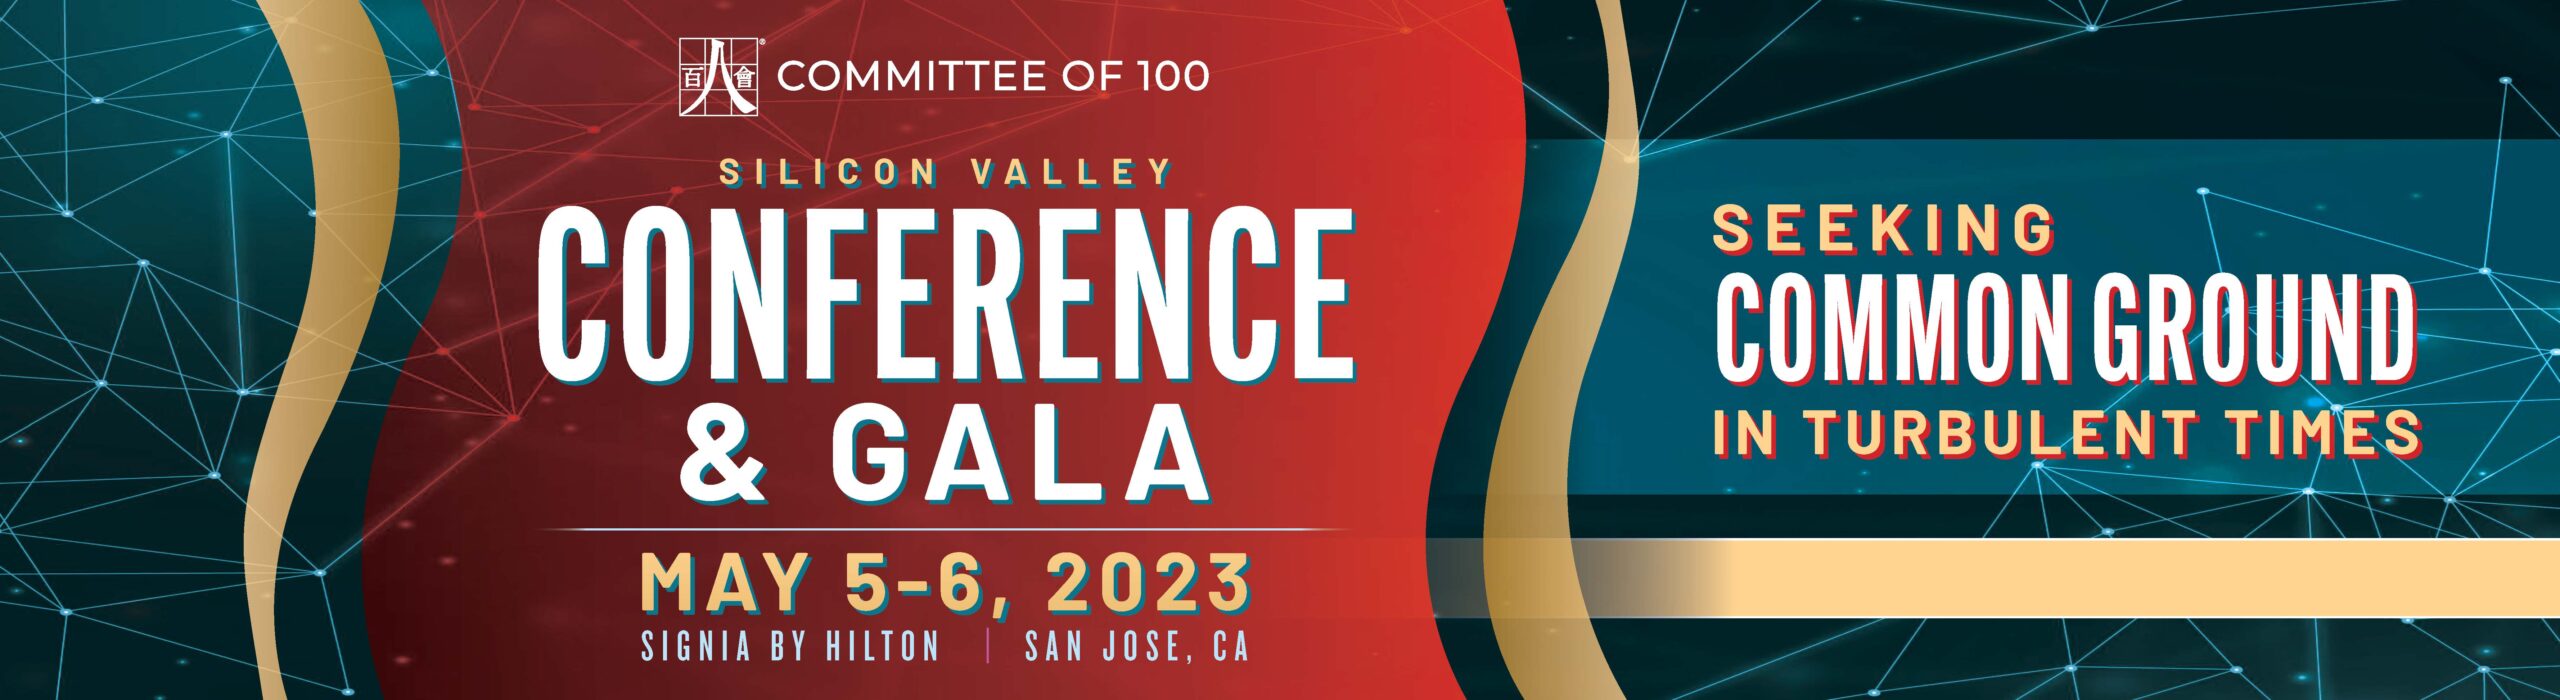 Committee of 100 Opens Registration for its 2023 Annual Conference &amp; Gala